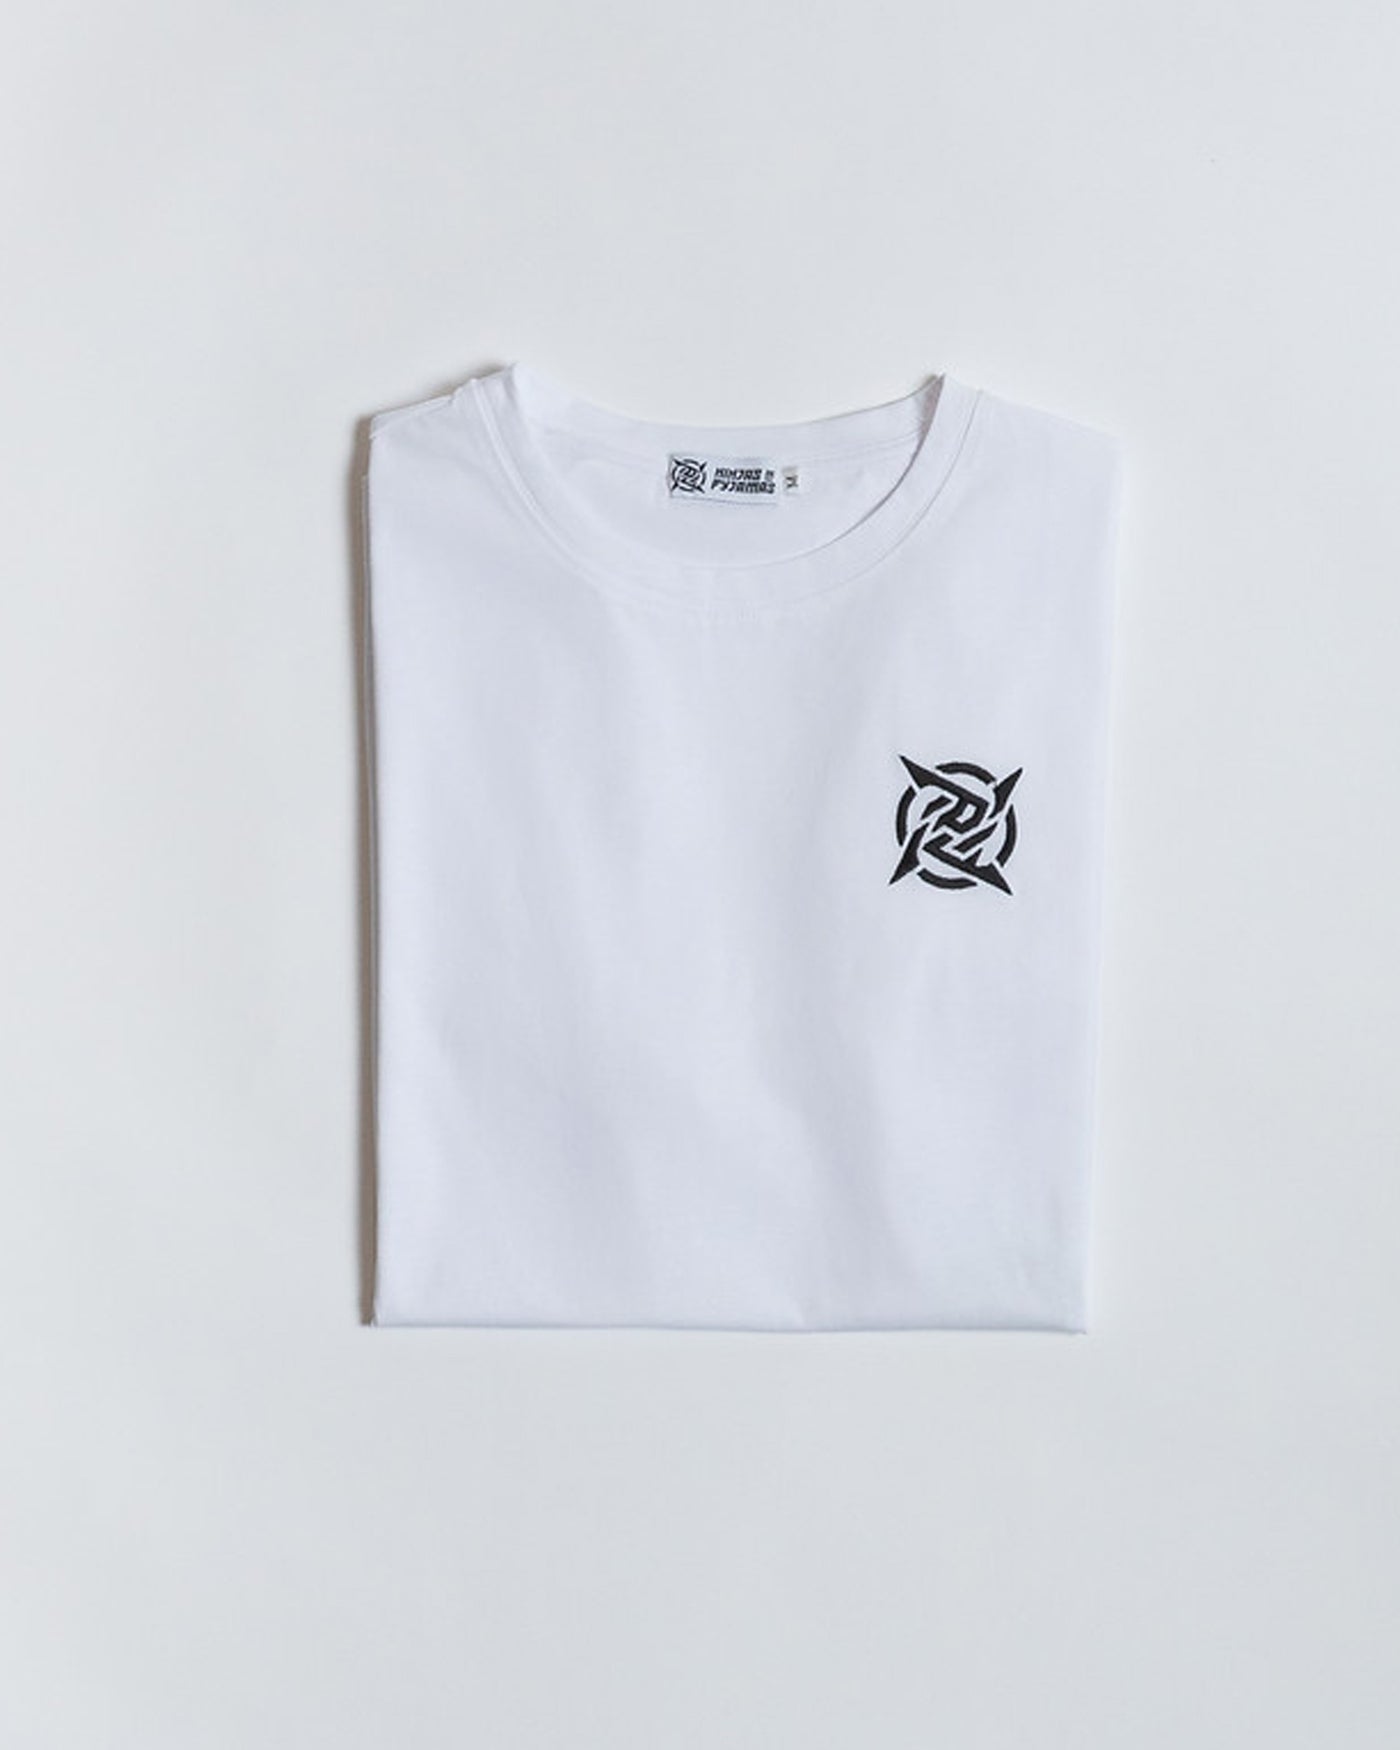 Lagom Collection - White T-shirt from Ninjas in Pyjamas Shop. An image displaying a white t-shirt from the Lagom Collection, featuring the Ninjas in Pyjamas logo subtly printed on the chest. This versatile and trendy t-shirt is a wardrobe essential, allowing you to express your passion for esports and NIP in a sleek and comfortable manner.